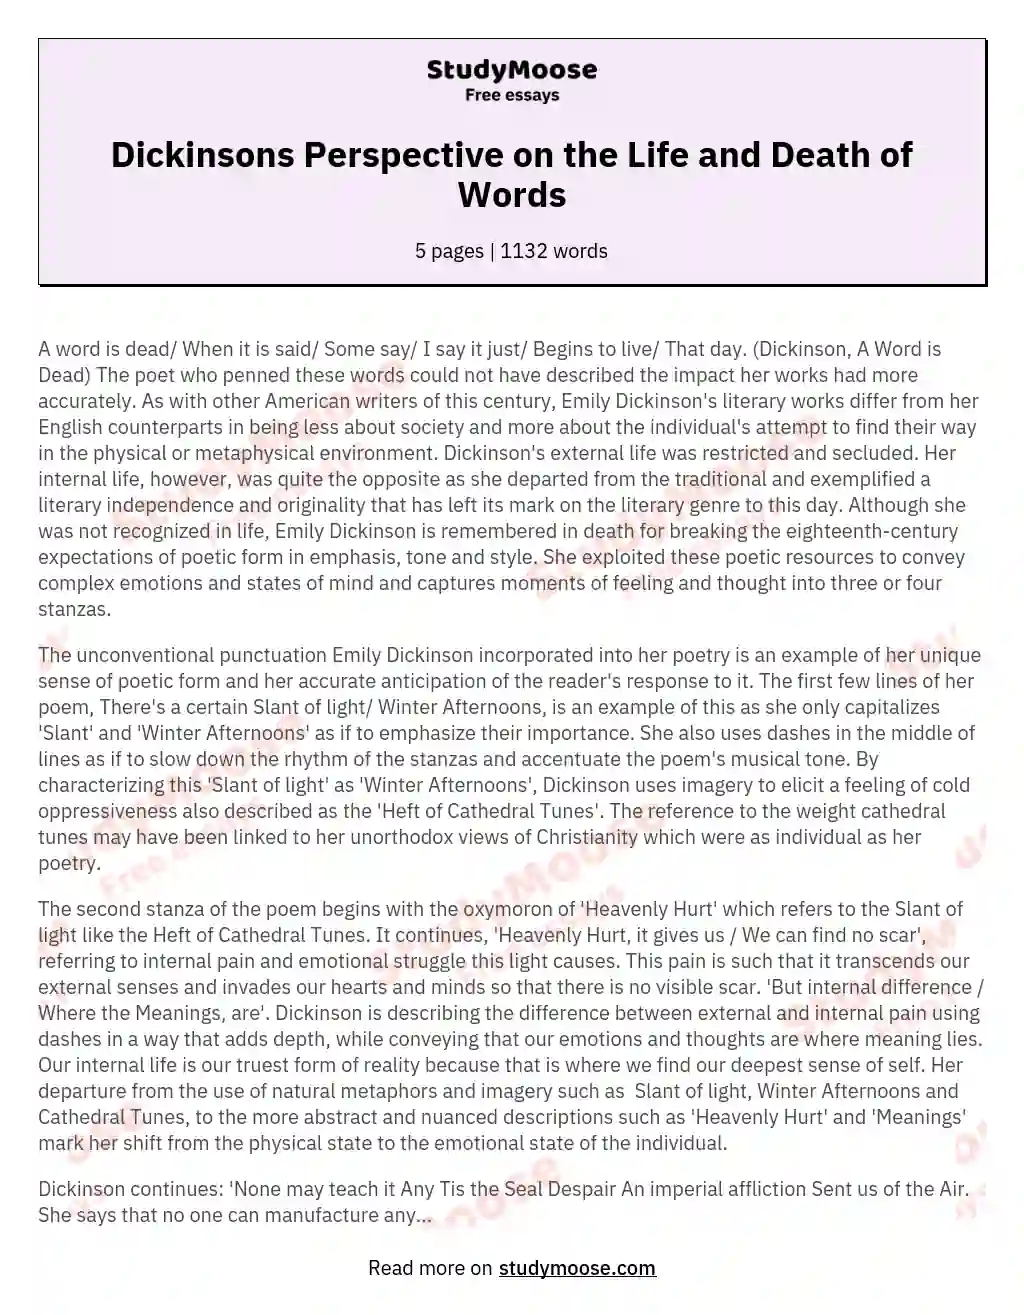 Dickinsons Perspective on the Life and Death of Words essay